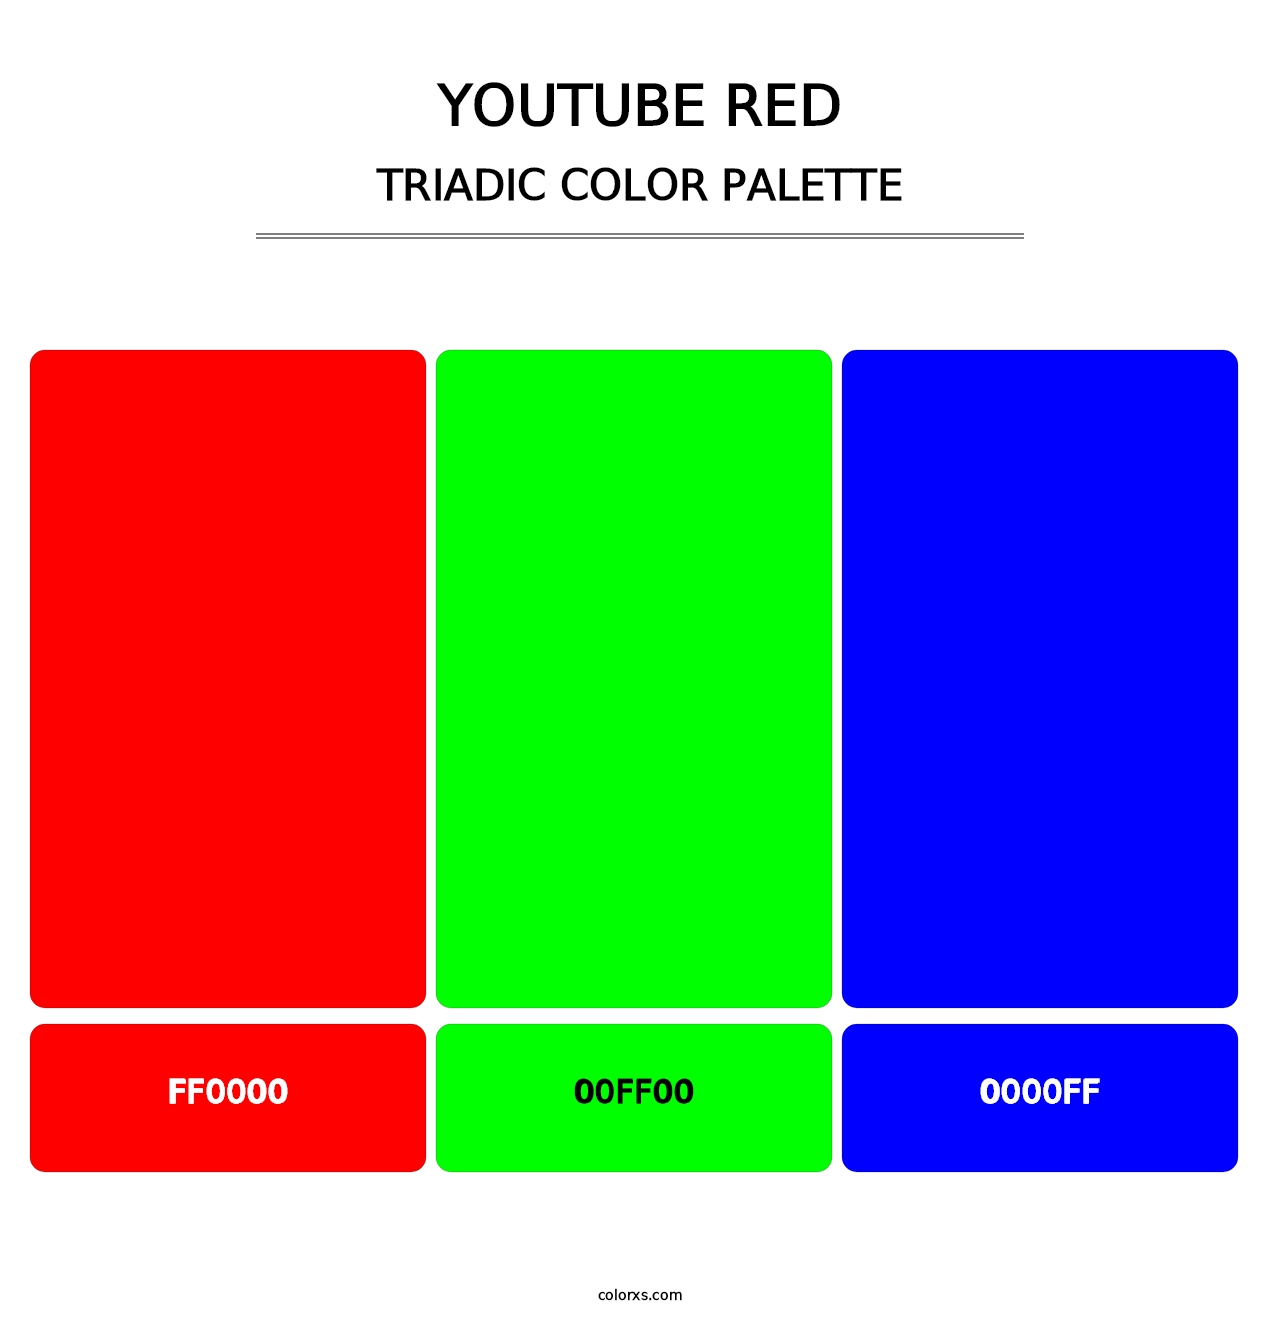 YouTube Red - Triadic Color Palette